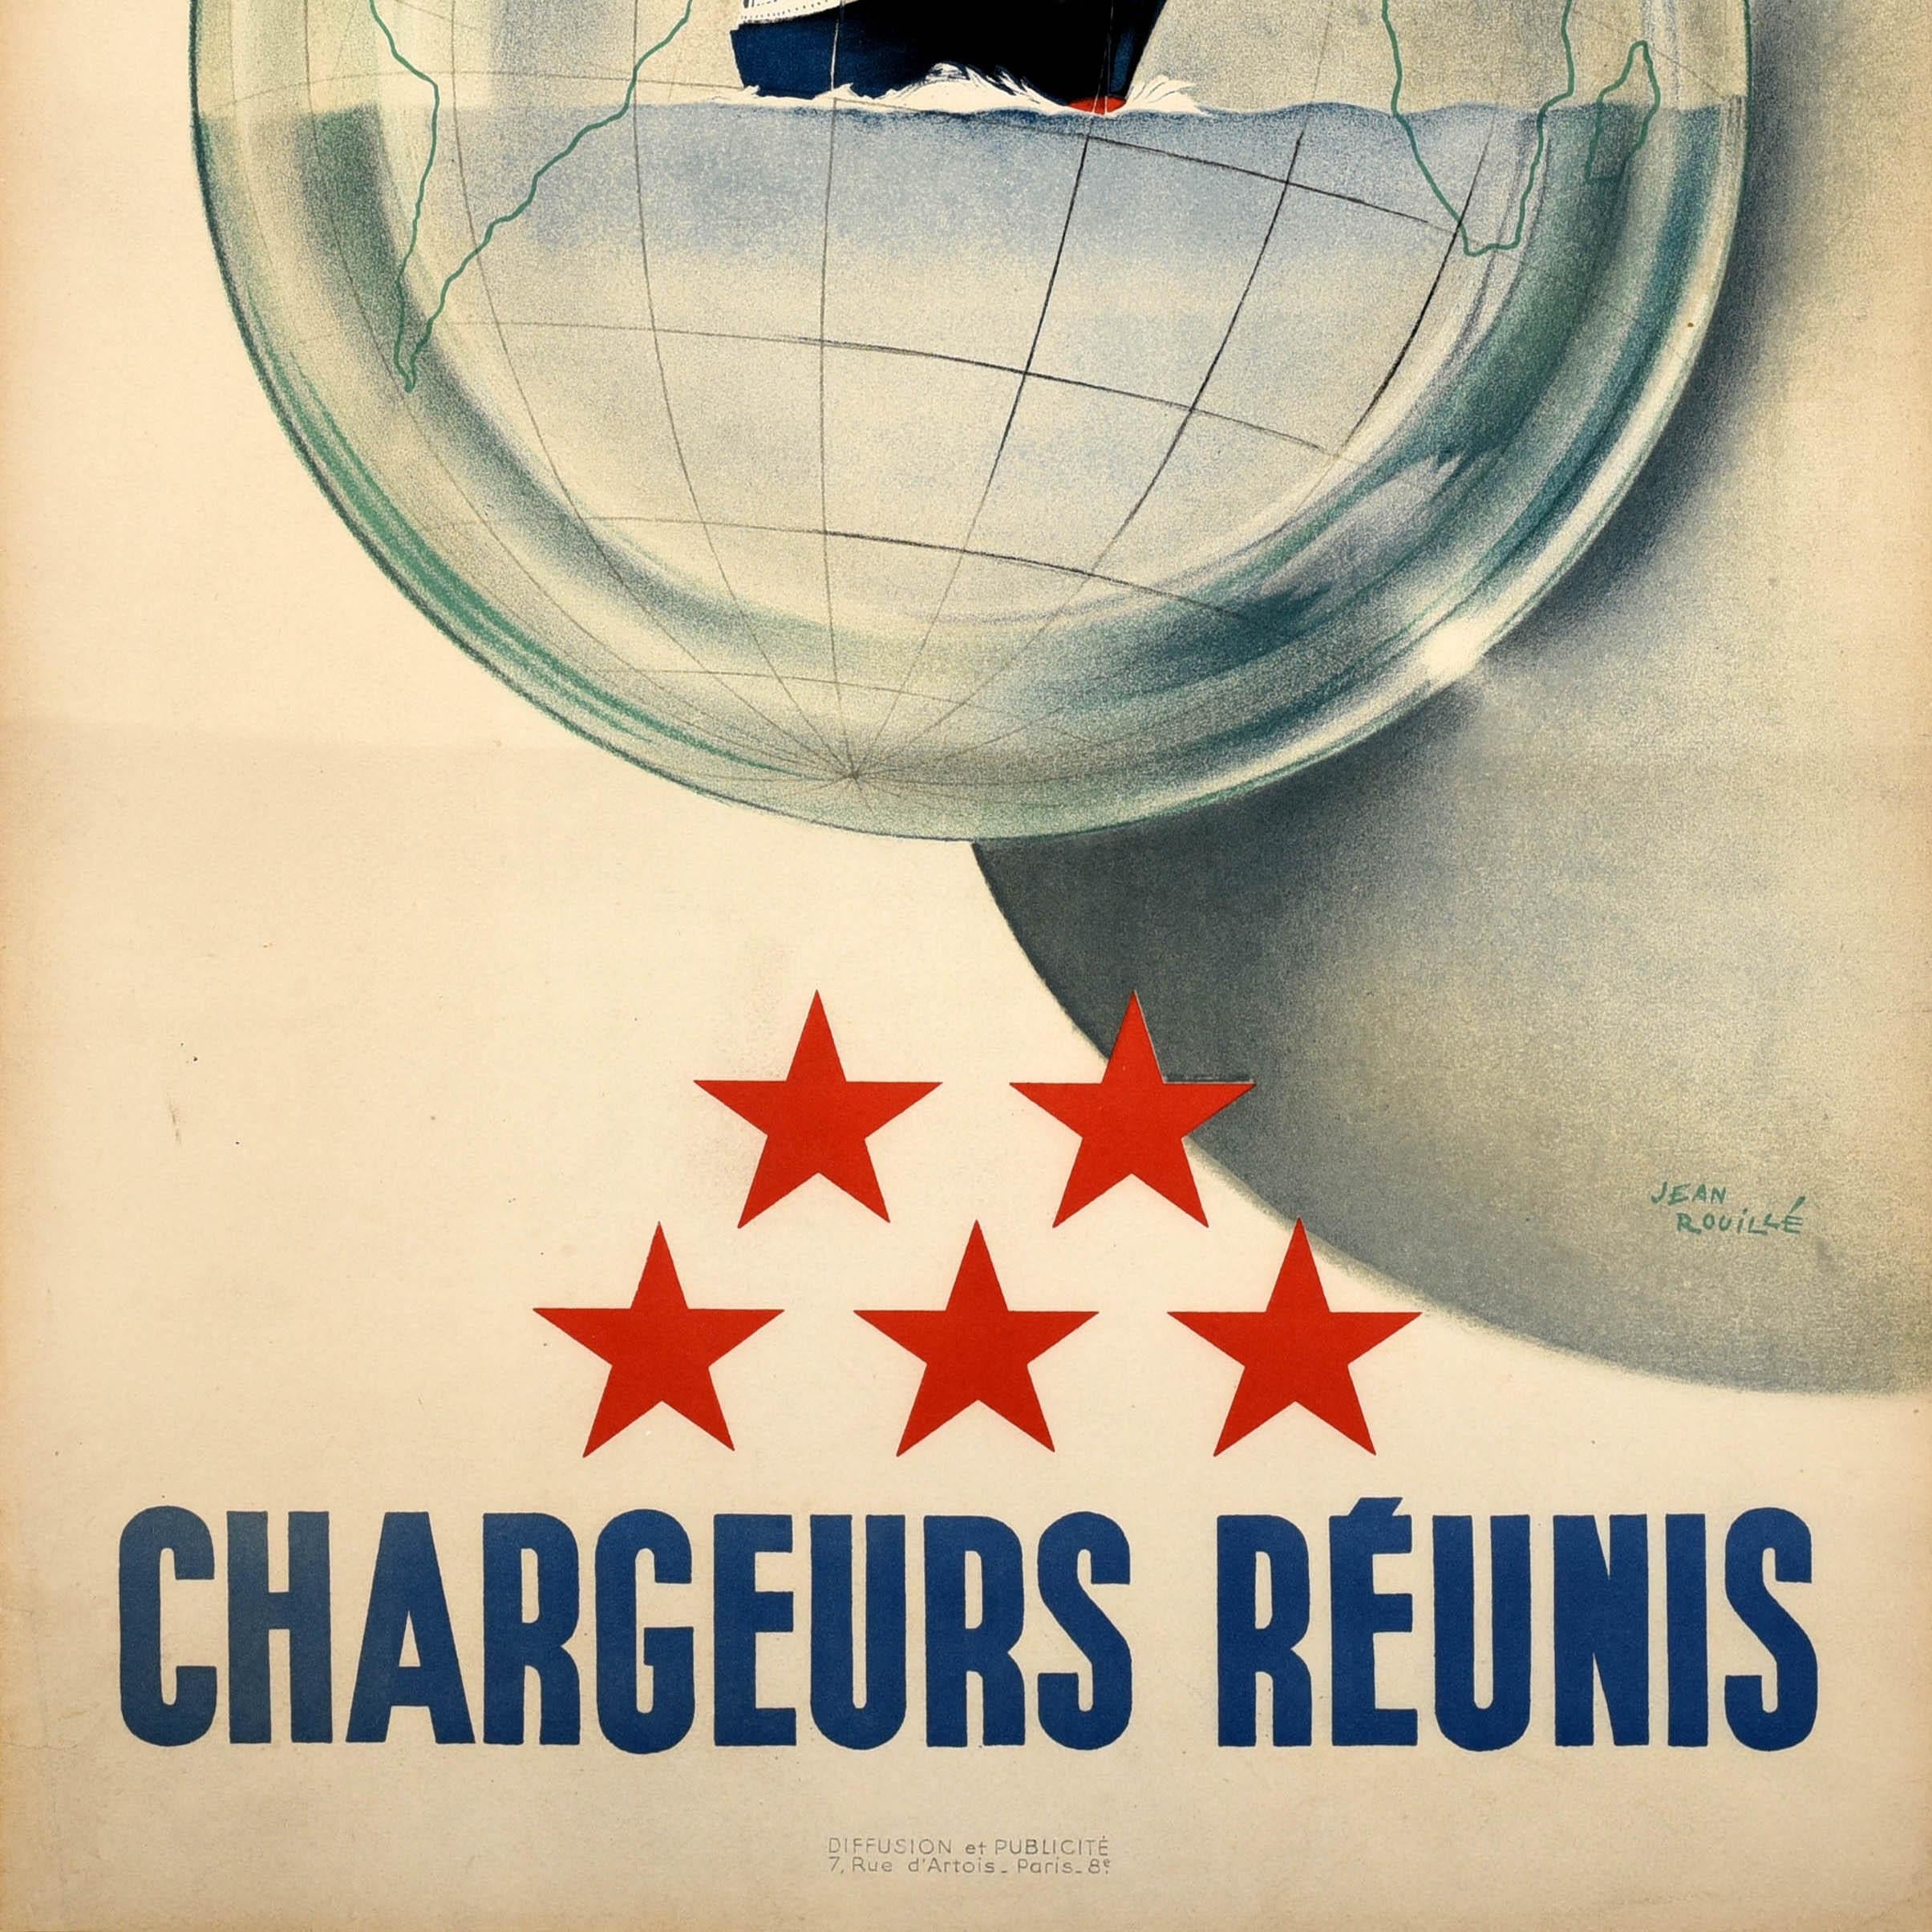 Original vintage travel advertising poster for Chargeurs Réunis / United Shippers - Design by Jean Rouille features a ship sailing at sea inside of a globe with five red stars and bold blue lettering below. Good condition, repaired tears, minor